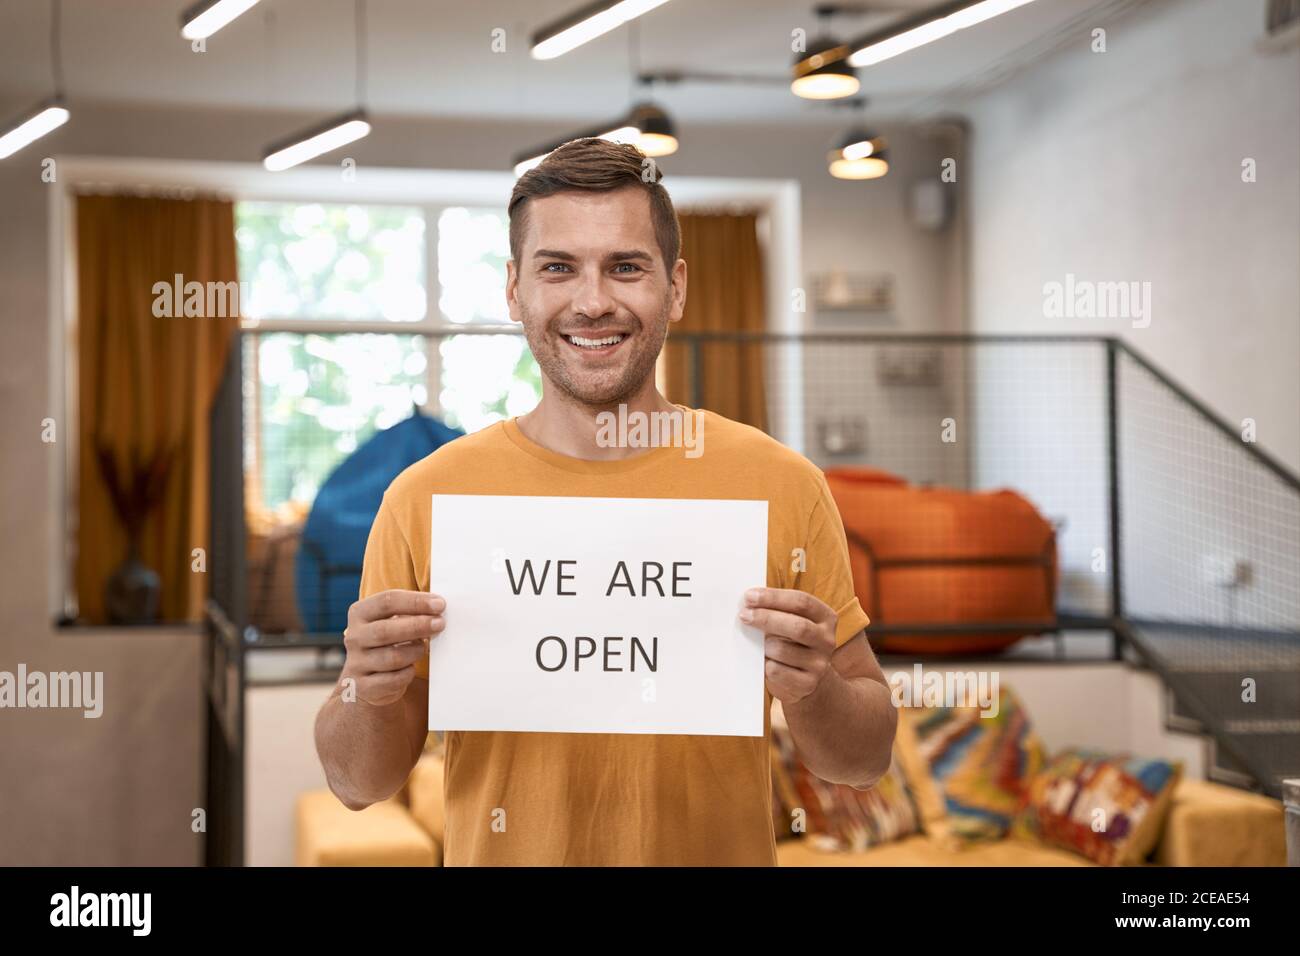 Opening office after lockdown. Young happy man showing paper with text WE ARE OPEN at camera and smiling while standing in the modern coworking space Stock Photo